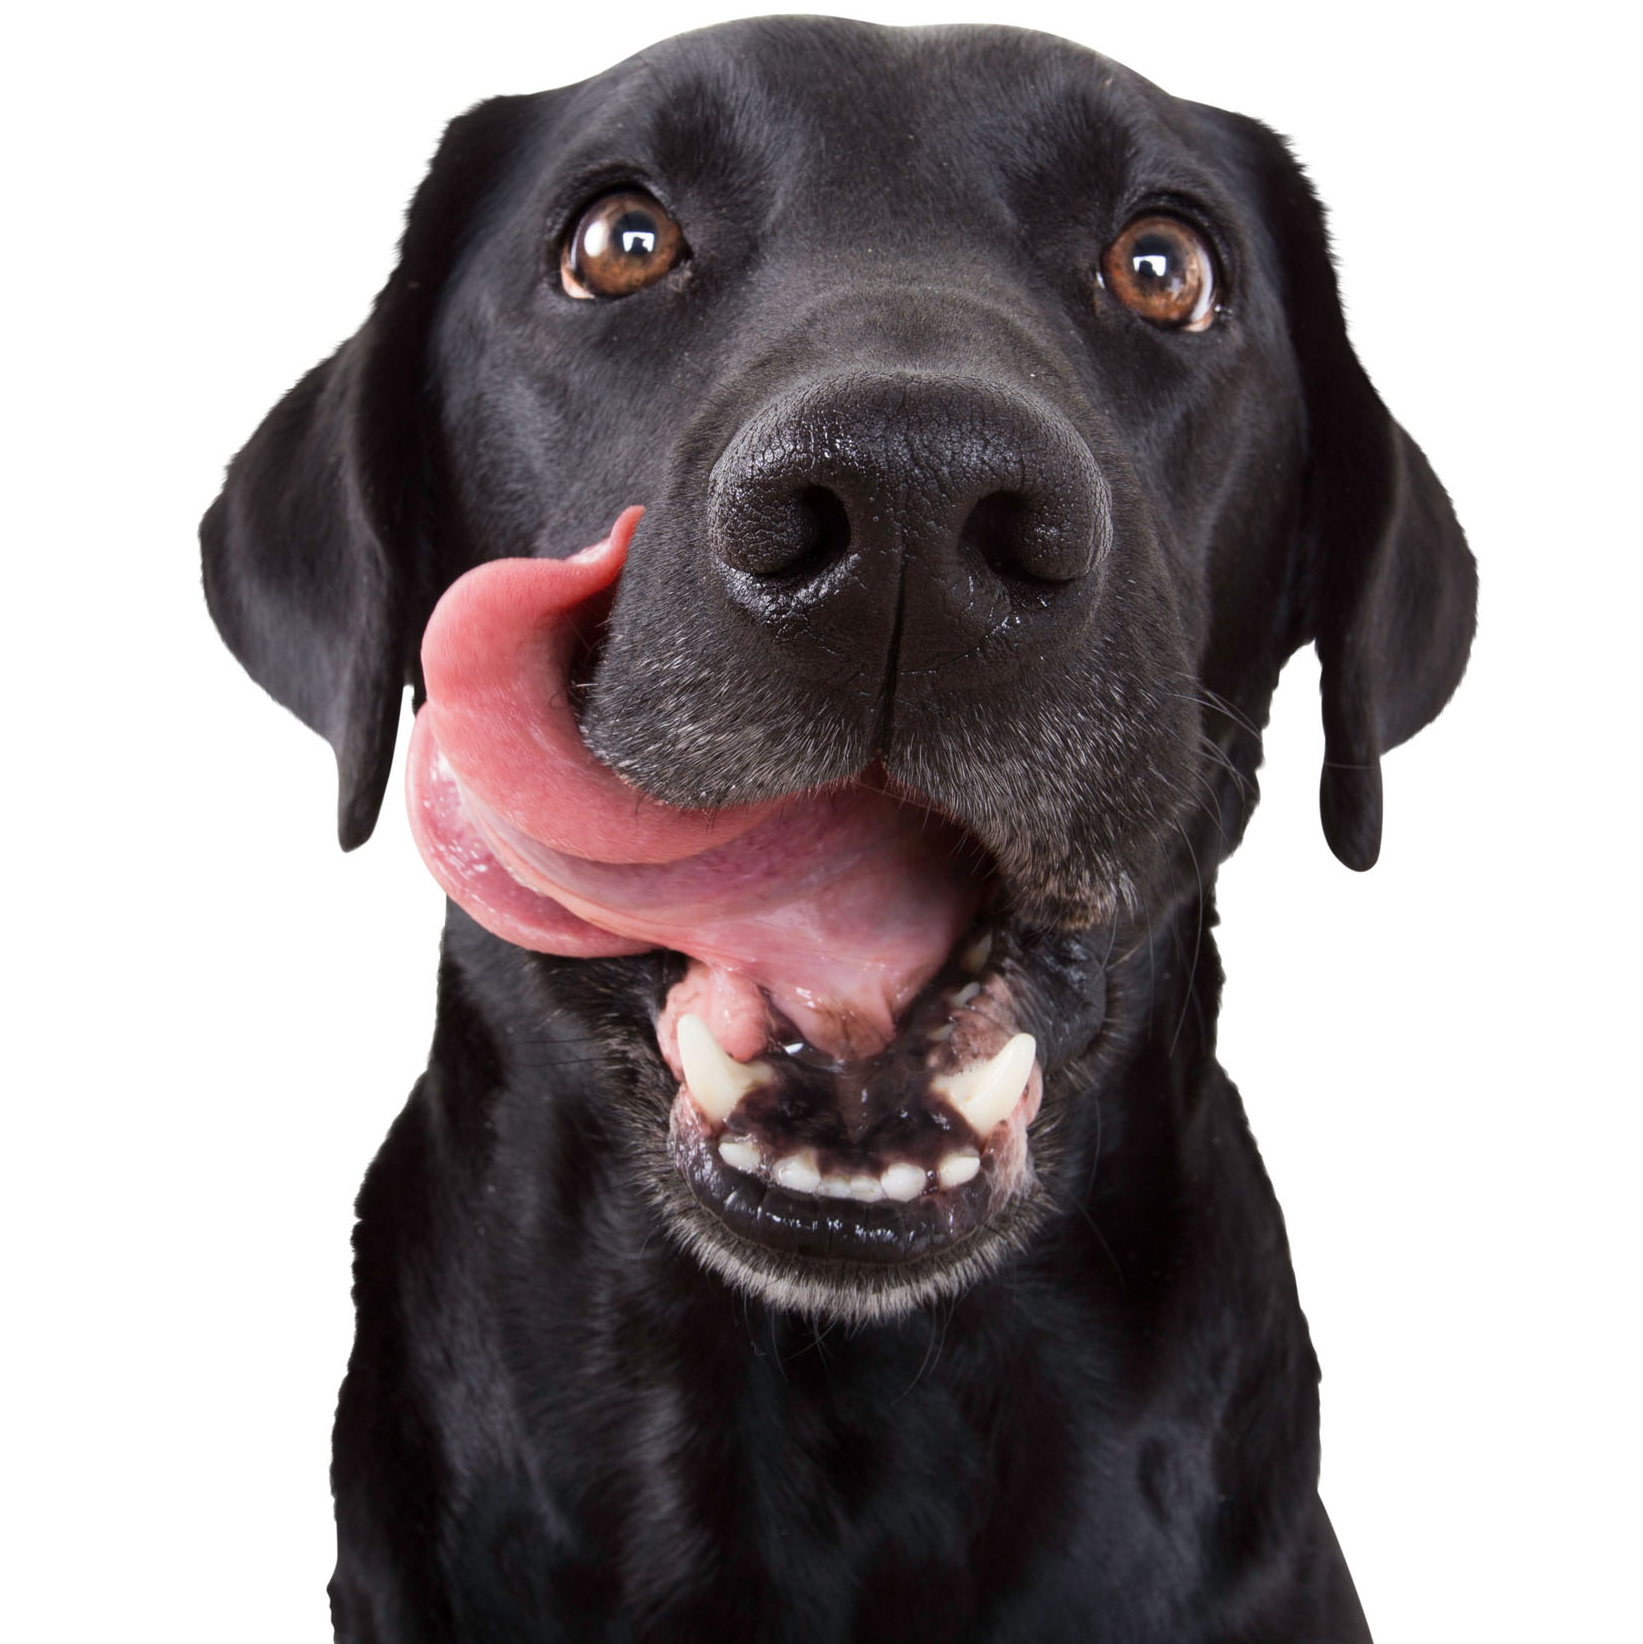 black lab dog with tongue out of its mouth